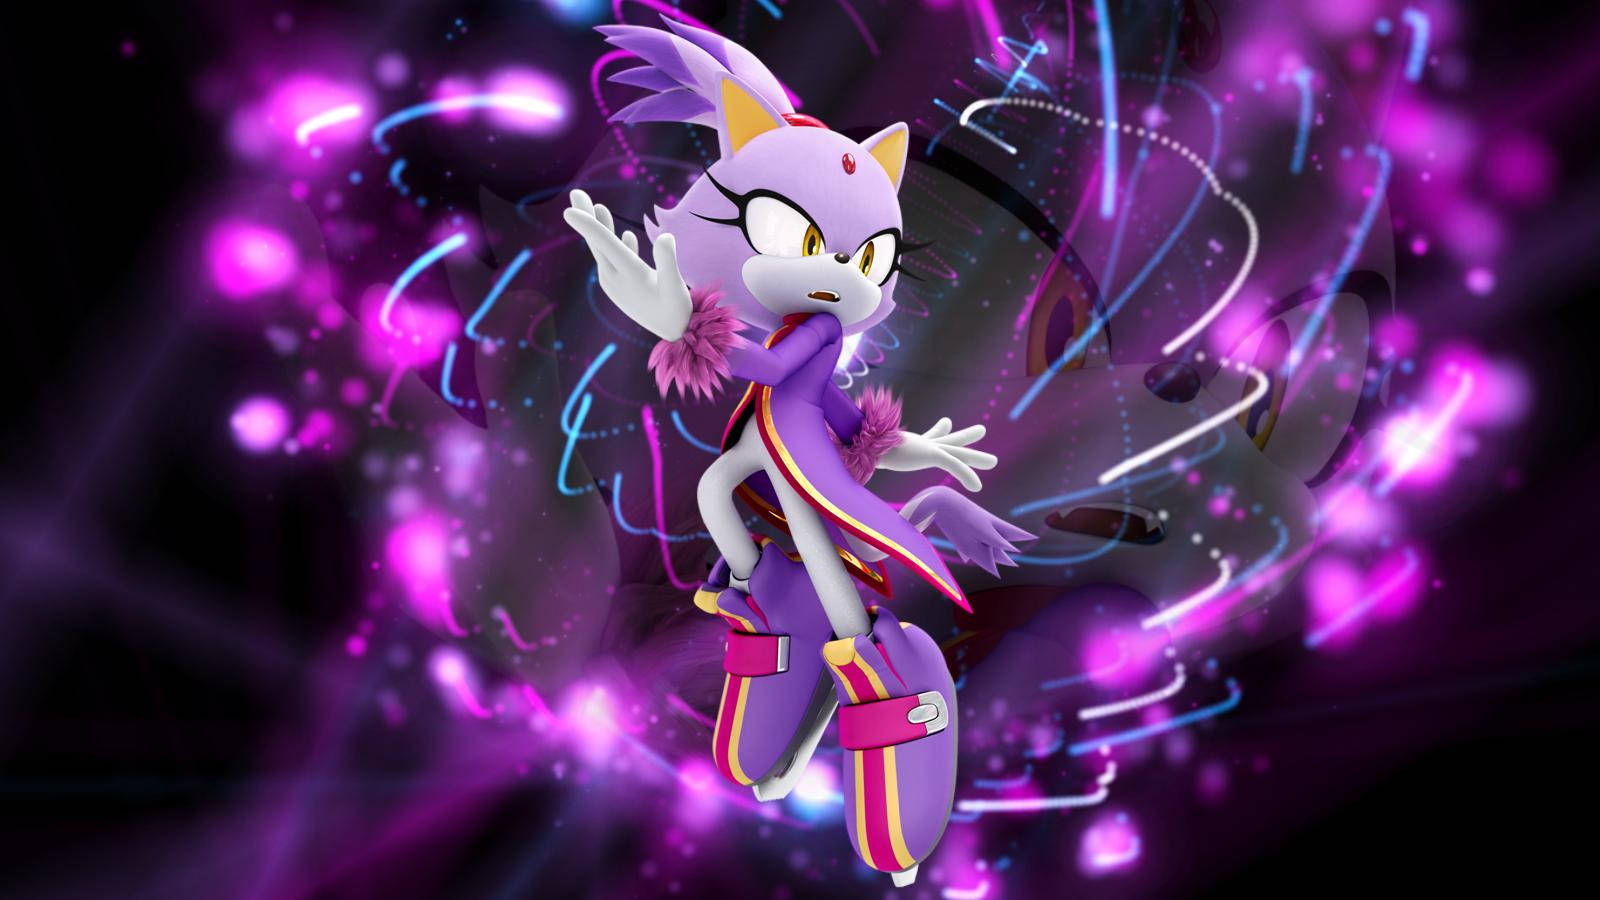 Wallpaper  1920x1200 px blaze cat characters game games hedgehog  Sonic team the video 1920x1200  CoolWallpapers  1909967  HD Wallpapers   WallHere